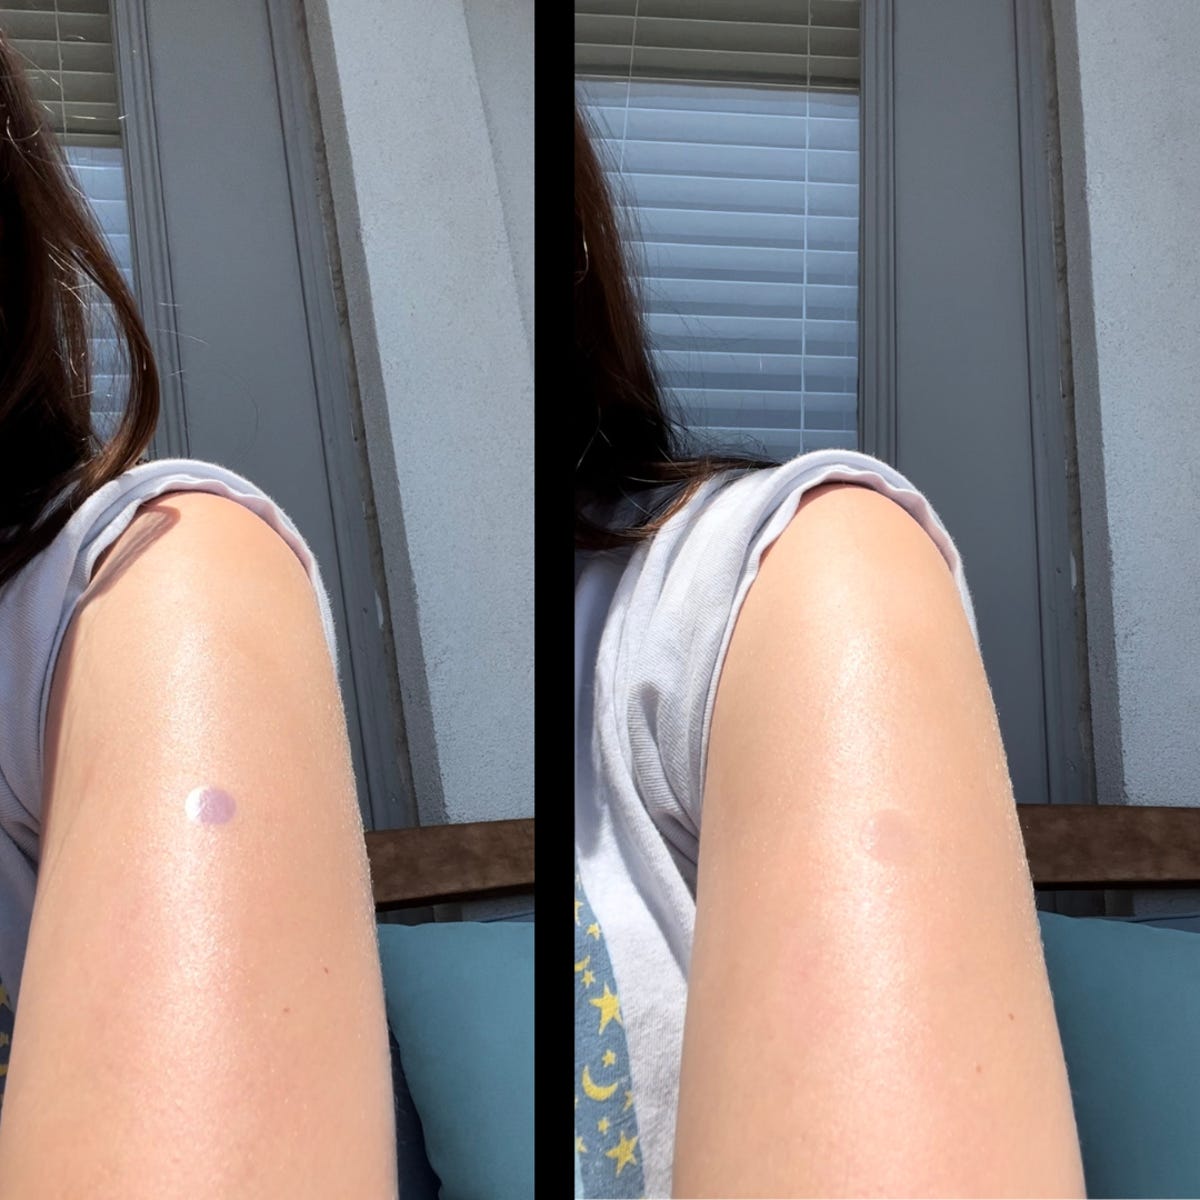 Four UV stickers on upper legs in the sun